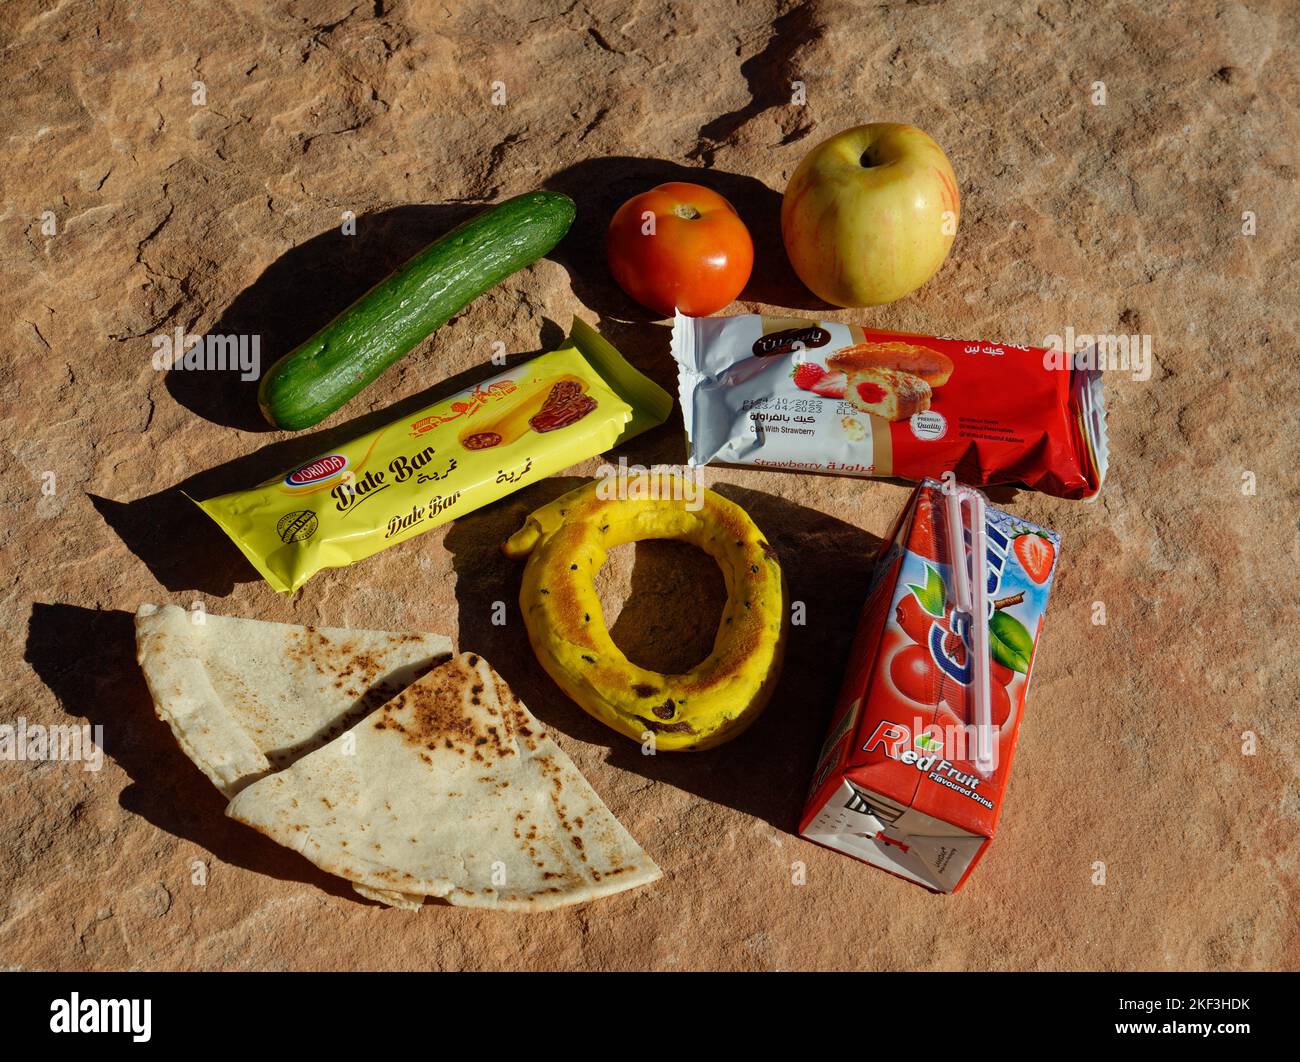 Breakfast foods from Jordan. Drink carton, sweet foods, cake in packets, apple, tomato, flatbread, and a small cucumber. Stock Photo